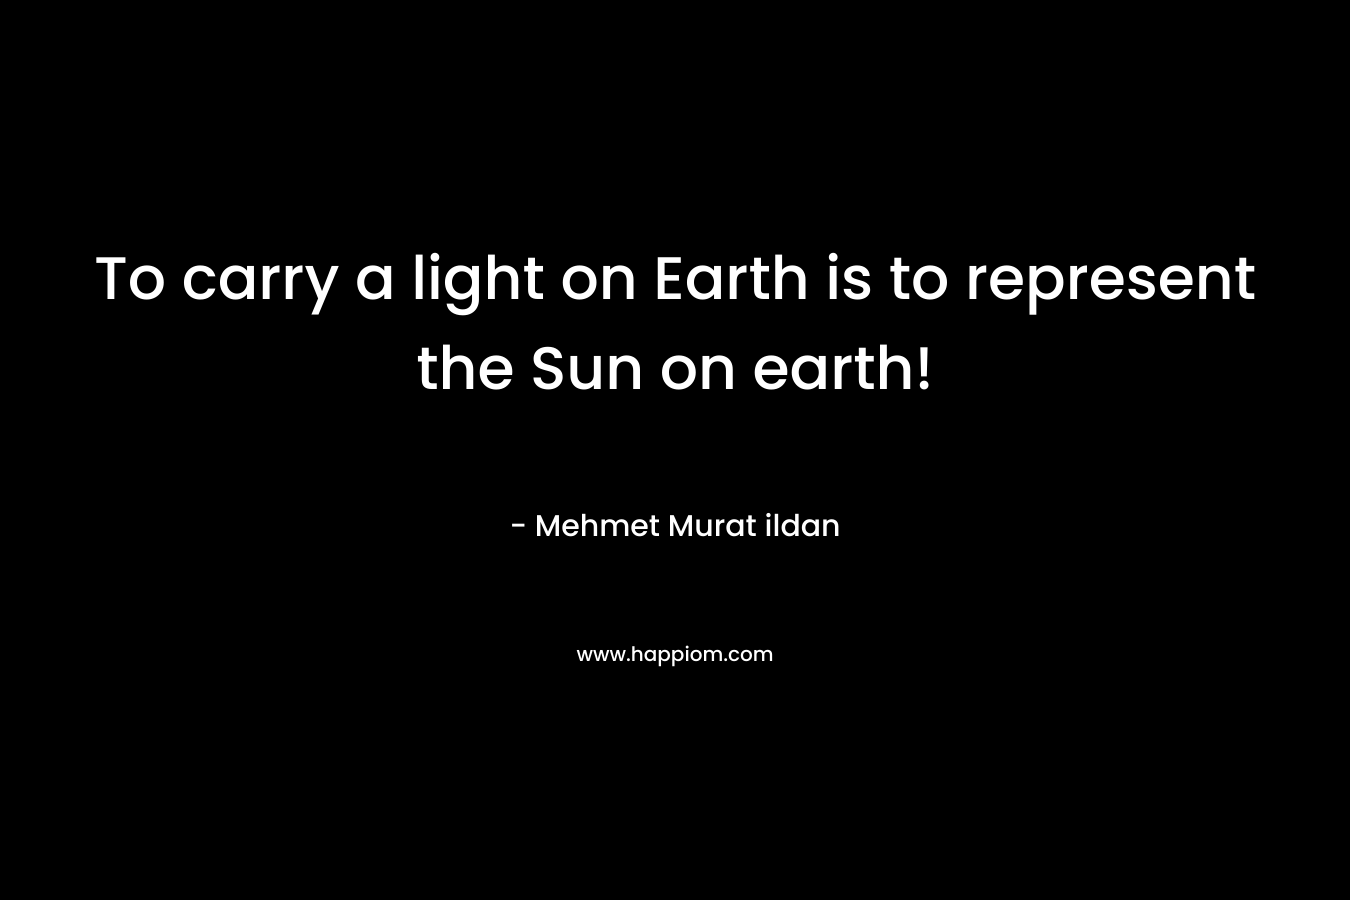 To carry a light on Earth is to represent the Sun on earth!